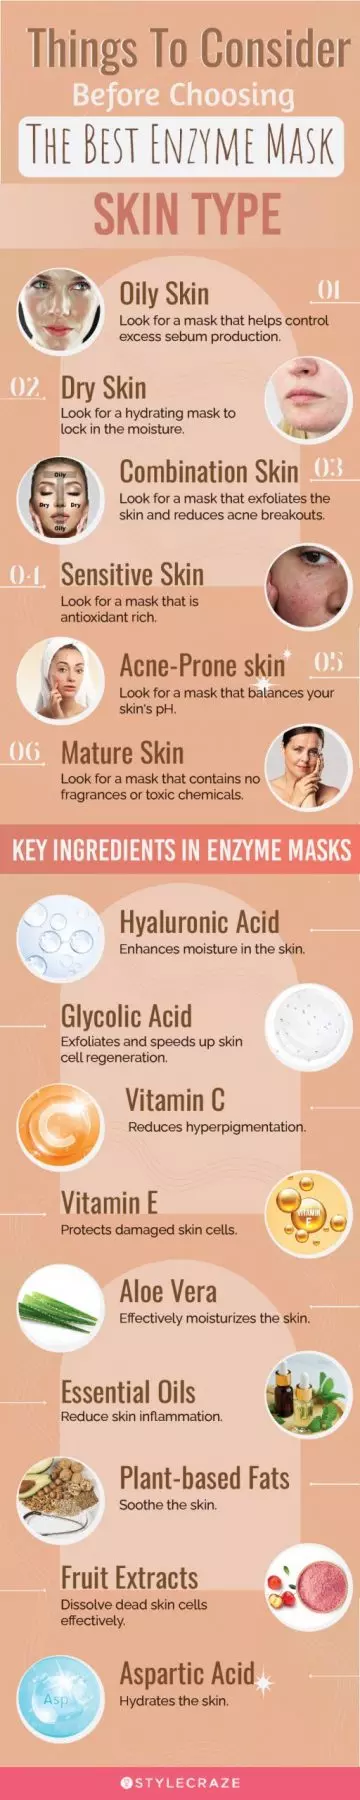 Things To Consider Before Choosing The Best Enzyme Mask (infographic)